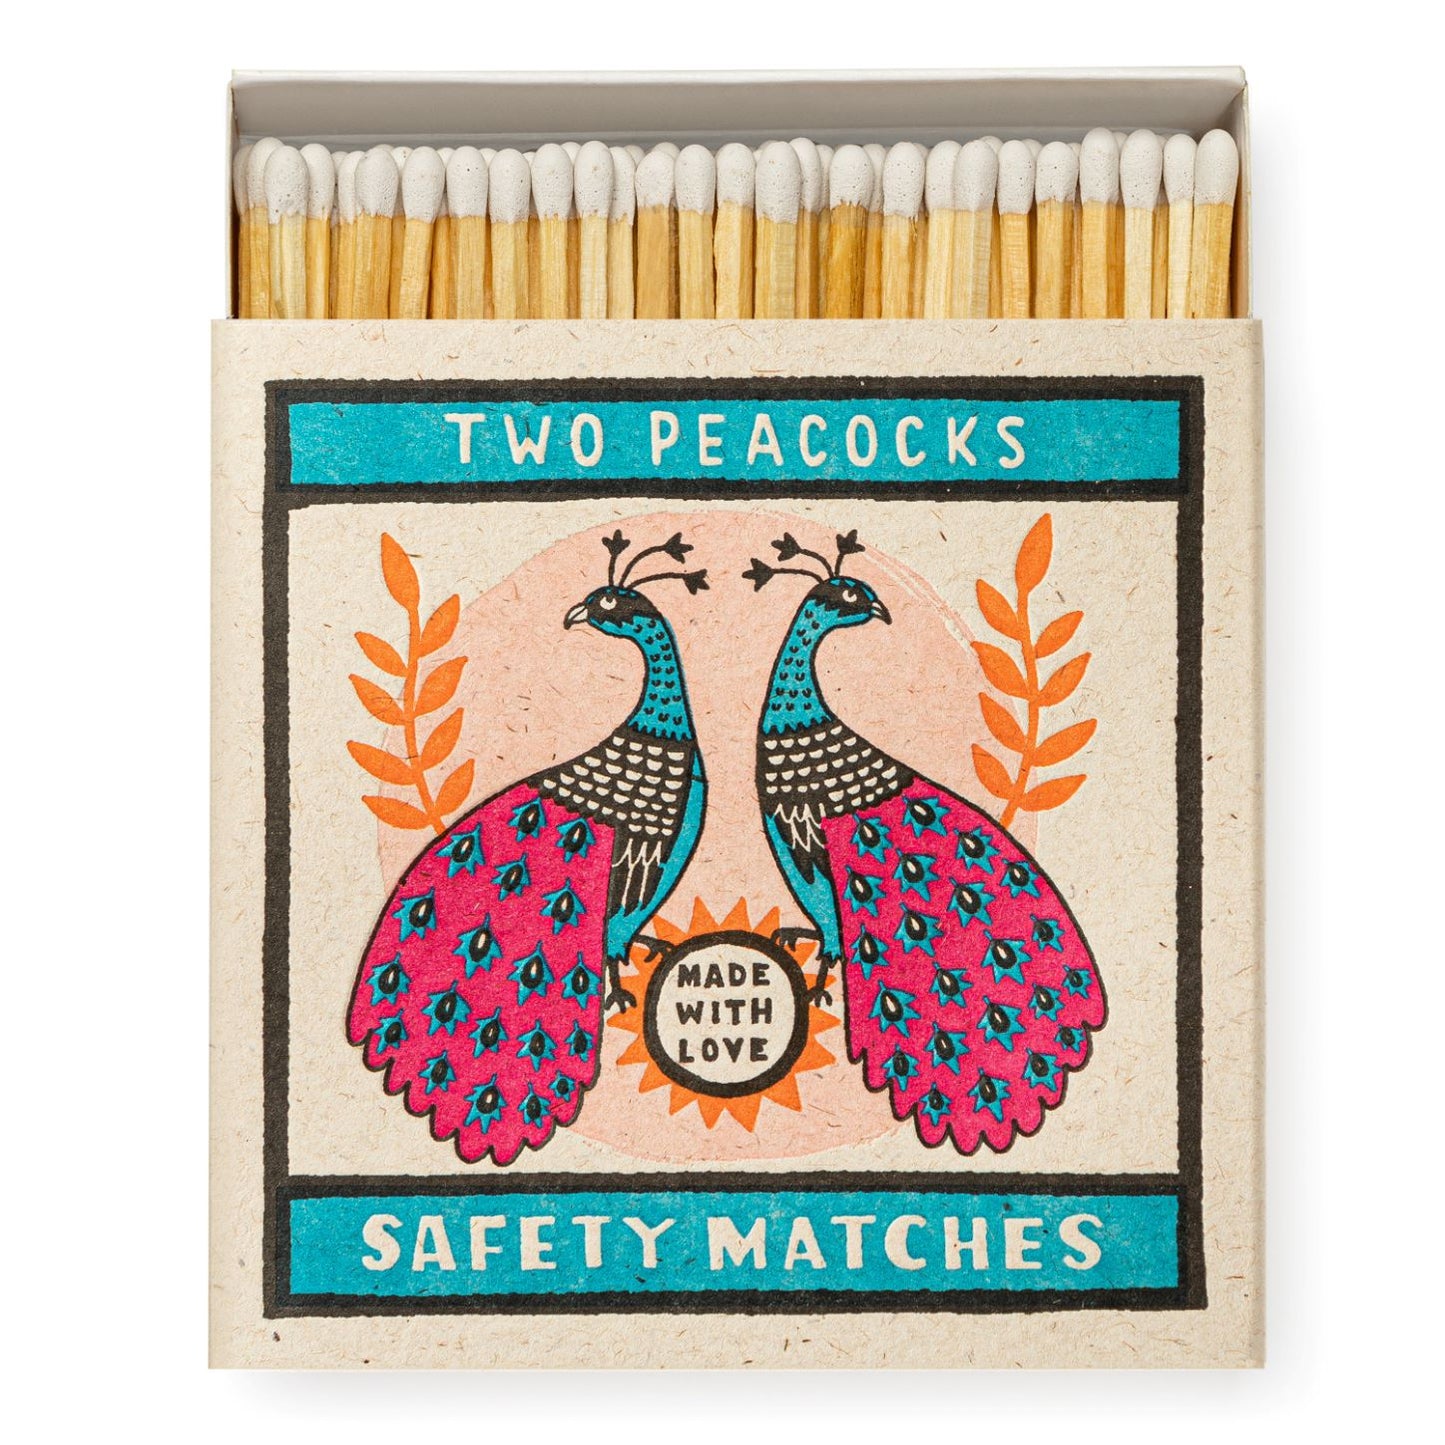 'Two Peacocks' Matches